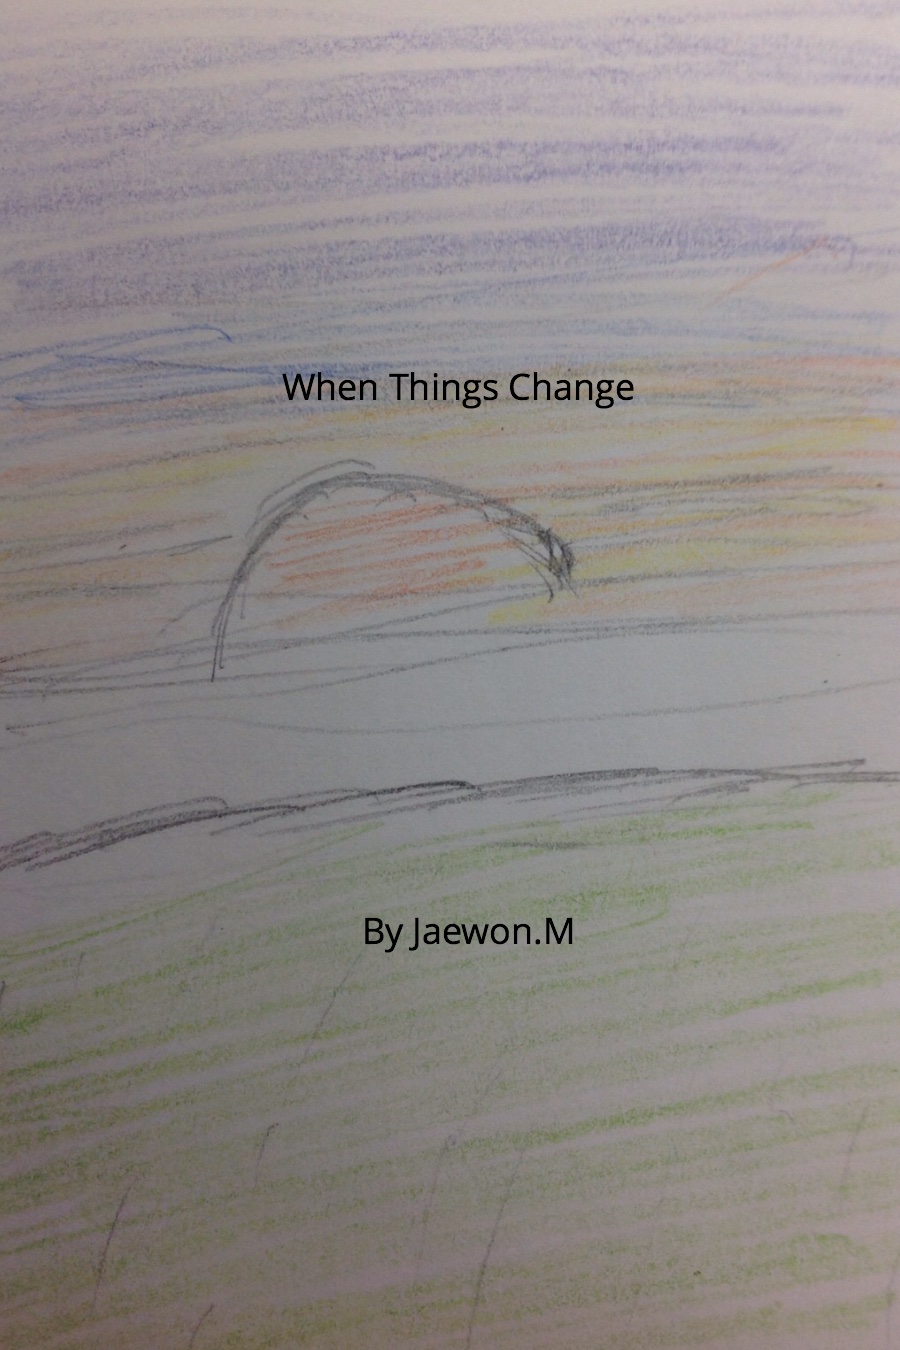 When Things Change by Jaewon M